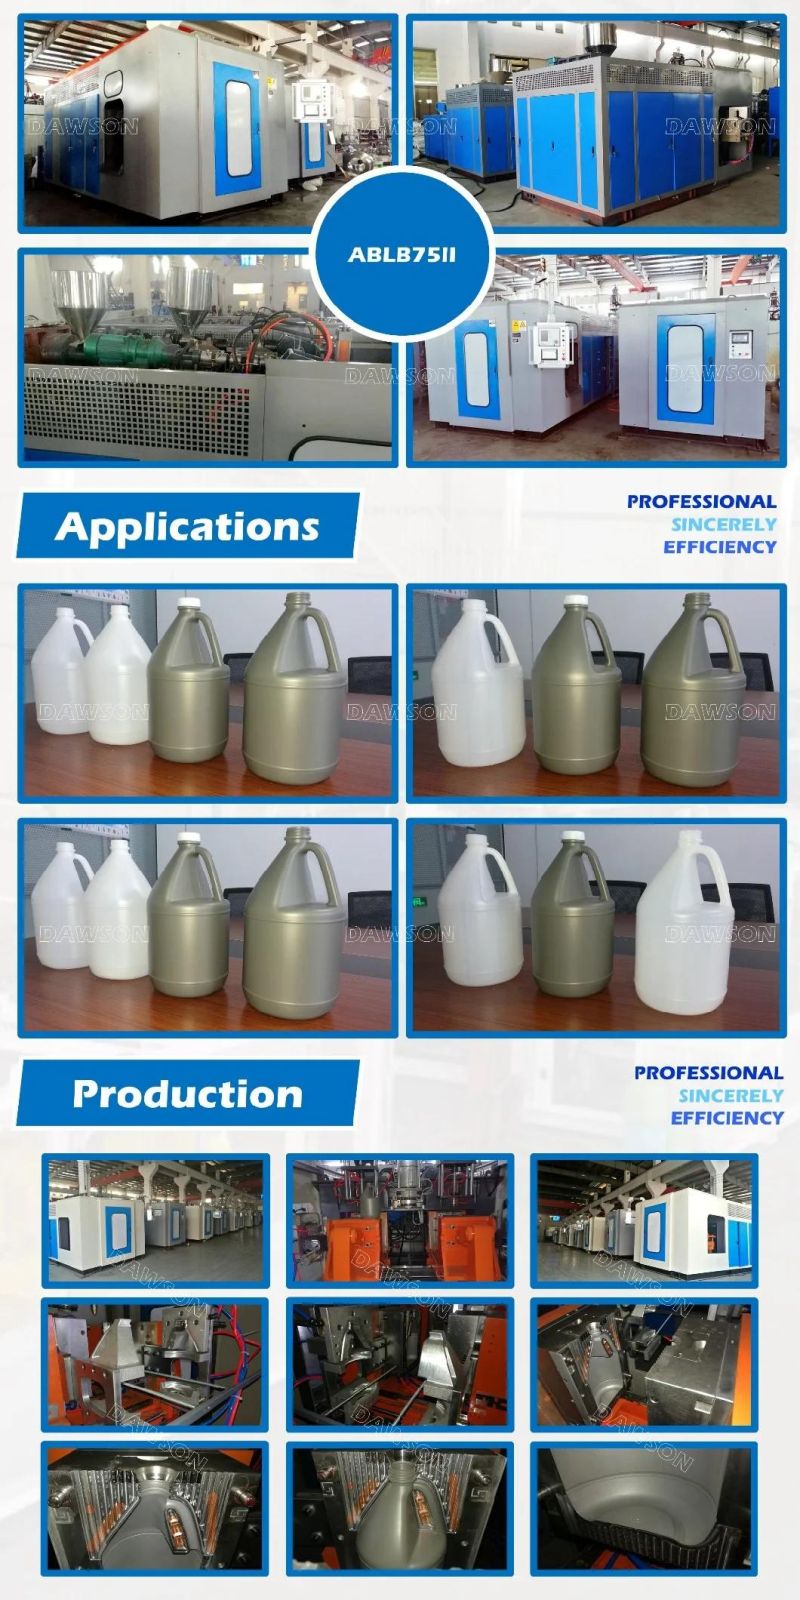 Blow Molding Machine with Auto Deflashing for 1gallon Milk Bottle